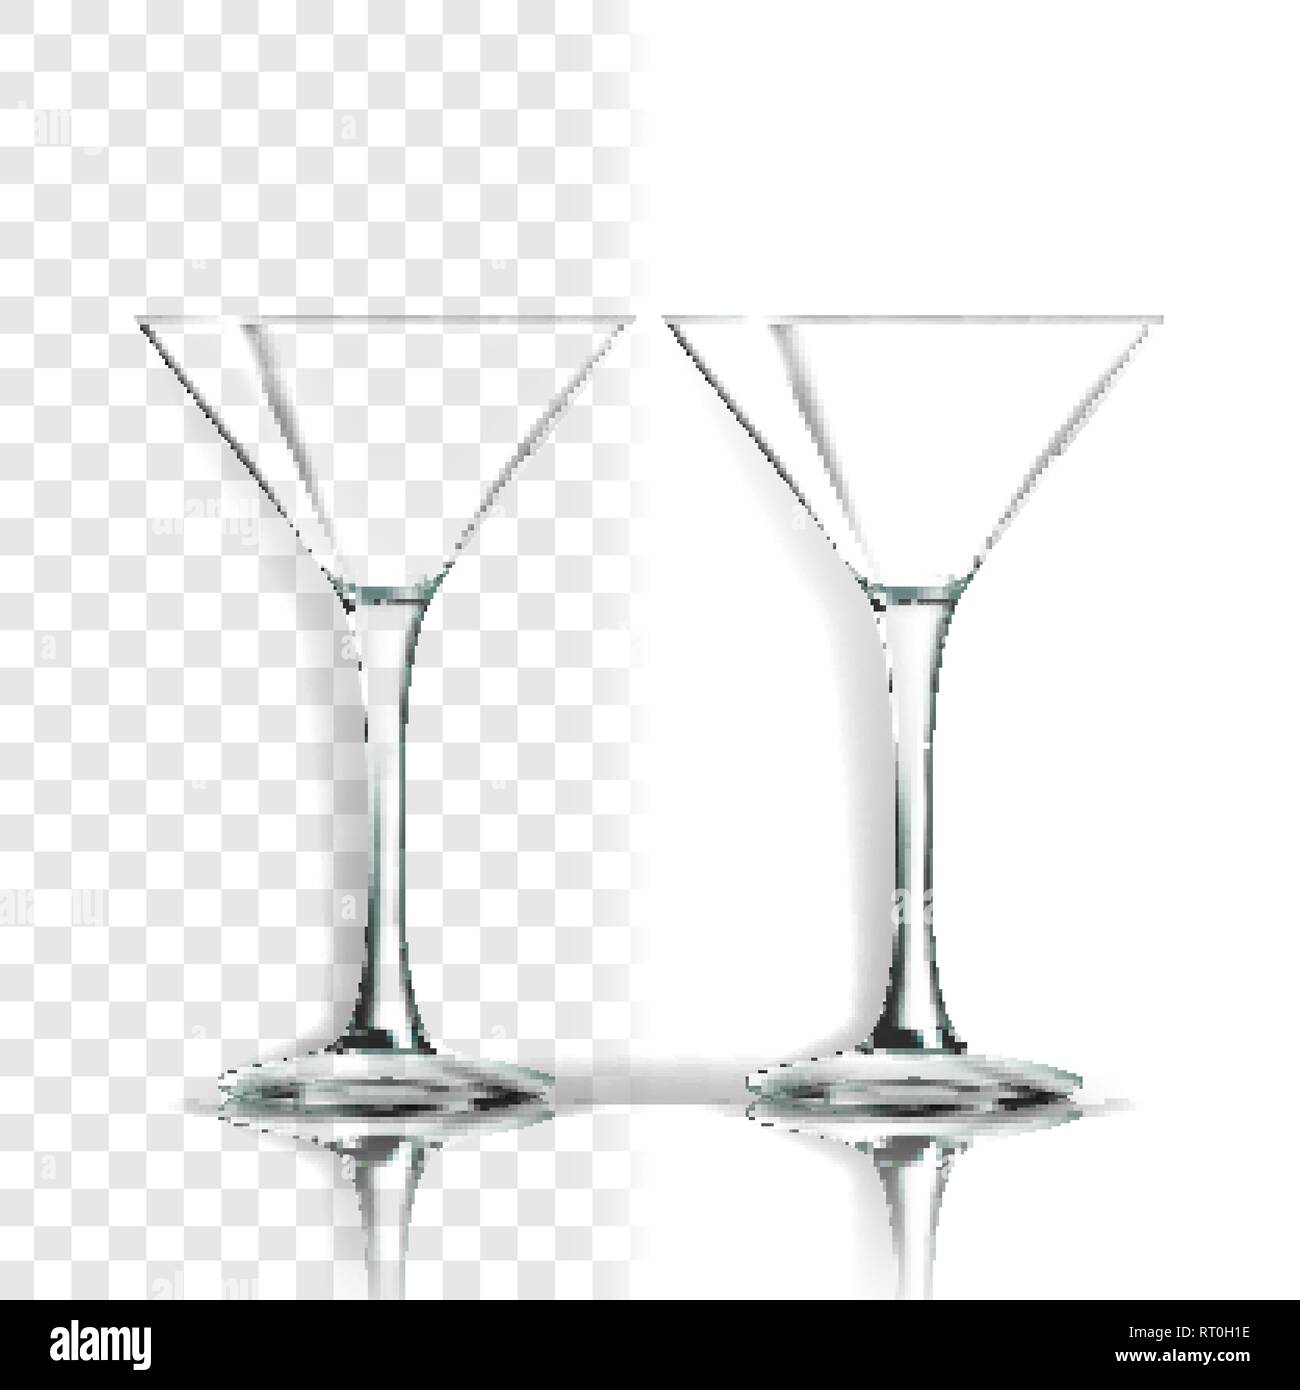 https://c8.alamy.com/comp/RT0H1E/transparent-glass-vector-classic-goblet-empty-clear-glass-cup-for-water-drink-wine-alcohol-juice-cocktail-realistic-shining-glassware-RT0H1E.jpg